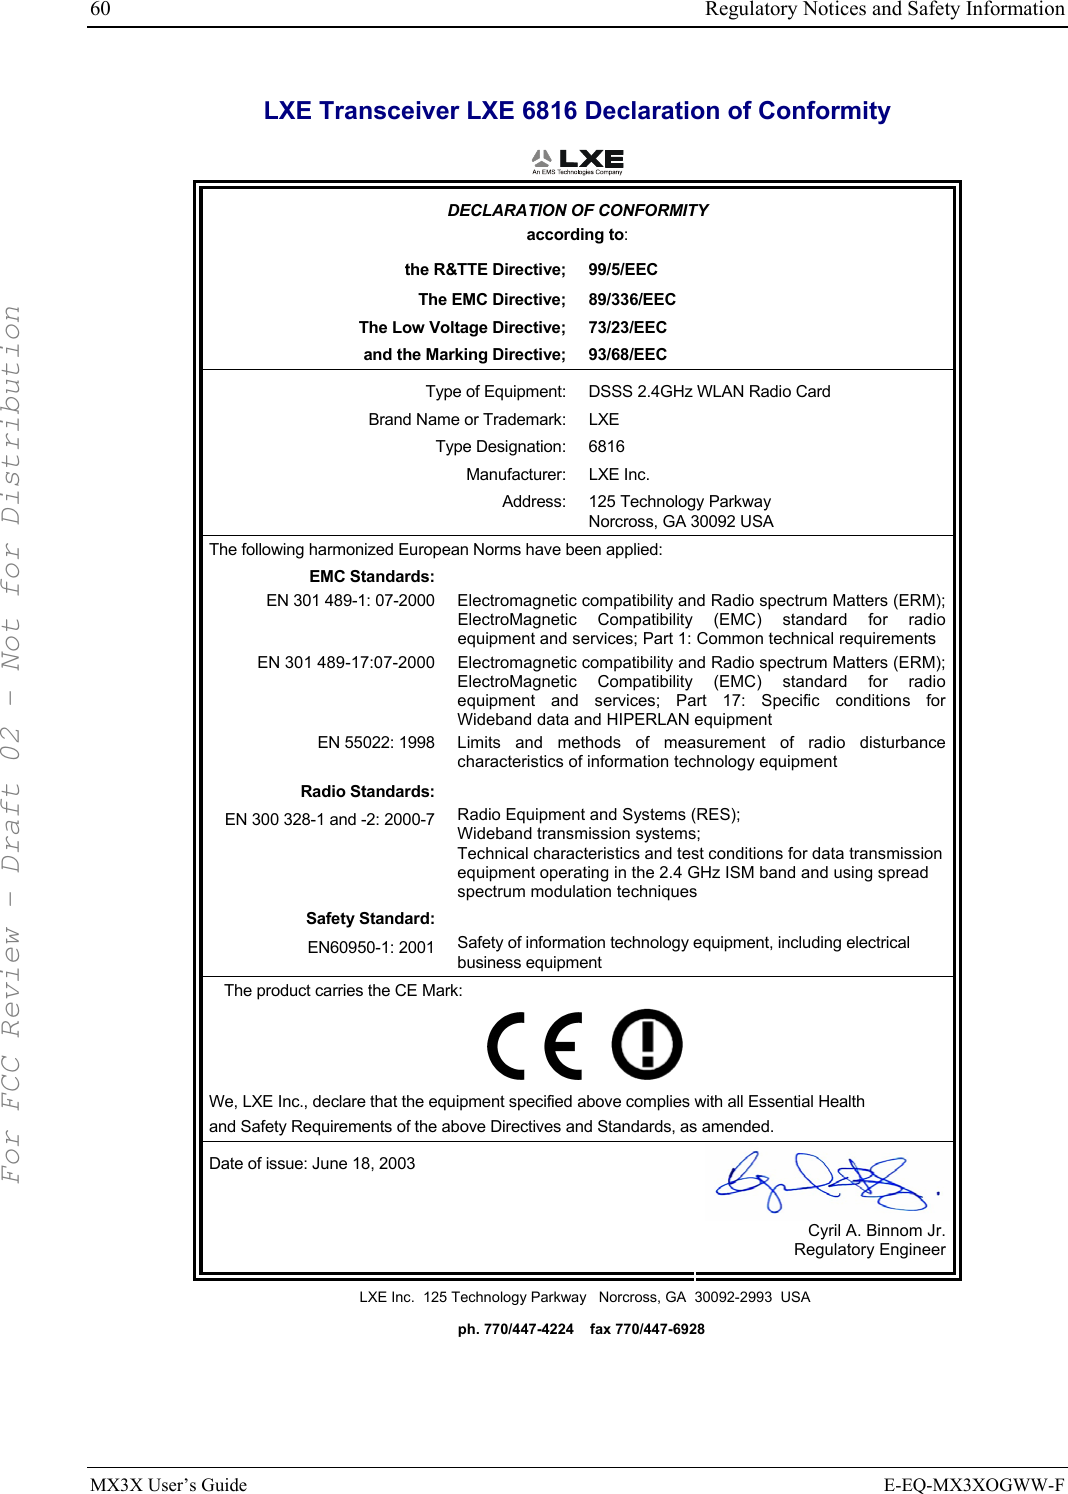 60  Regulatory Notices and Safety Information MX3X User’s Guide  E-EQ-MX3XOGWW-F LXE Transceiver LXE 6816 Declaration of Conformity  DECLARATION OF CONFORMITY according to: the R&amp;TTE Directive;  99/5/EEC The EMC Directive;  89/336/EEC The Low Voltage Directive;  73/23/EEC and the Marking Directive;  93/68/EEC Type of Equipment:  DSSS 2.4GHz WLAN Radio Card Brand Name or Trademark:  LXE Type Designation:  6816 Manufacturer: LXE Inc. Address: 125 Technology Parkway Norcross, GA 30092 USA The following harmonized European Norms have been applied:   EMC Standards:  EN 301 489-1: 07-2000  Electromagnetic compatibility and Radio spectrum Matters (ERM); ElectroMagnetic Compatibility (EMC) standard for radio equipment and services; Part 1: Common technical requirements EN 301 489-17:07-2000  Electromagnetic compatibility and Radio spectrum Matters (ERM); ElectroMagnetic Compatibility (EMC) standard for radio equipment and services; Part 17: Specific conditions for Wideband data and HIPERLAN equipment EN 55022: 1998 Limits and methods of measurement of radio disturbance characteristics of information technology equipment Radio Standards:  EN 300 328-1 and -2: 2000-7 Radio Equipment and Systems (RES); Wideband transmission systems; Technical characteristics and test conditions for data transmission equipment operating in the 2.4 GHz ISM band and using spread spectrum modulation techniques Safety Standard:  EN60950-1: 2001 Safety of information technology equipment, including electrical business equipment The product carries the CE Mark:         We, LXE Inc., declare that the equipment specified above complies with all Essential Health  and Safety Requirements of the above Directives and Standards, as amended. Date of issue: June 18, 2003  Cyril A. Binnom Jr. Regulatory Engineer LXE Inc.  125 Technology Parkway   Norcross, GA  30092-2993  USA   ph. 770/447-4224    fax 770/447-6928 For FCC Review - Draft 02 - Not for Distribution